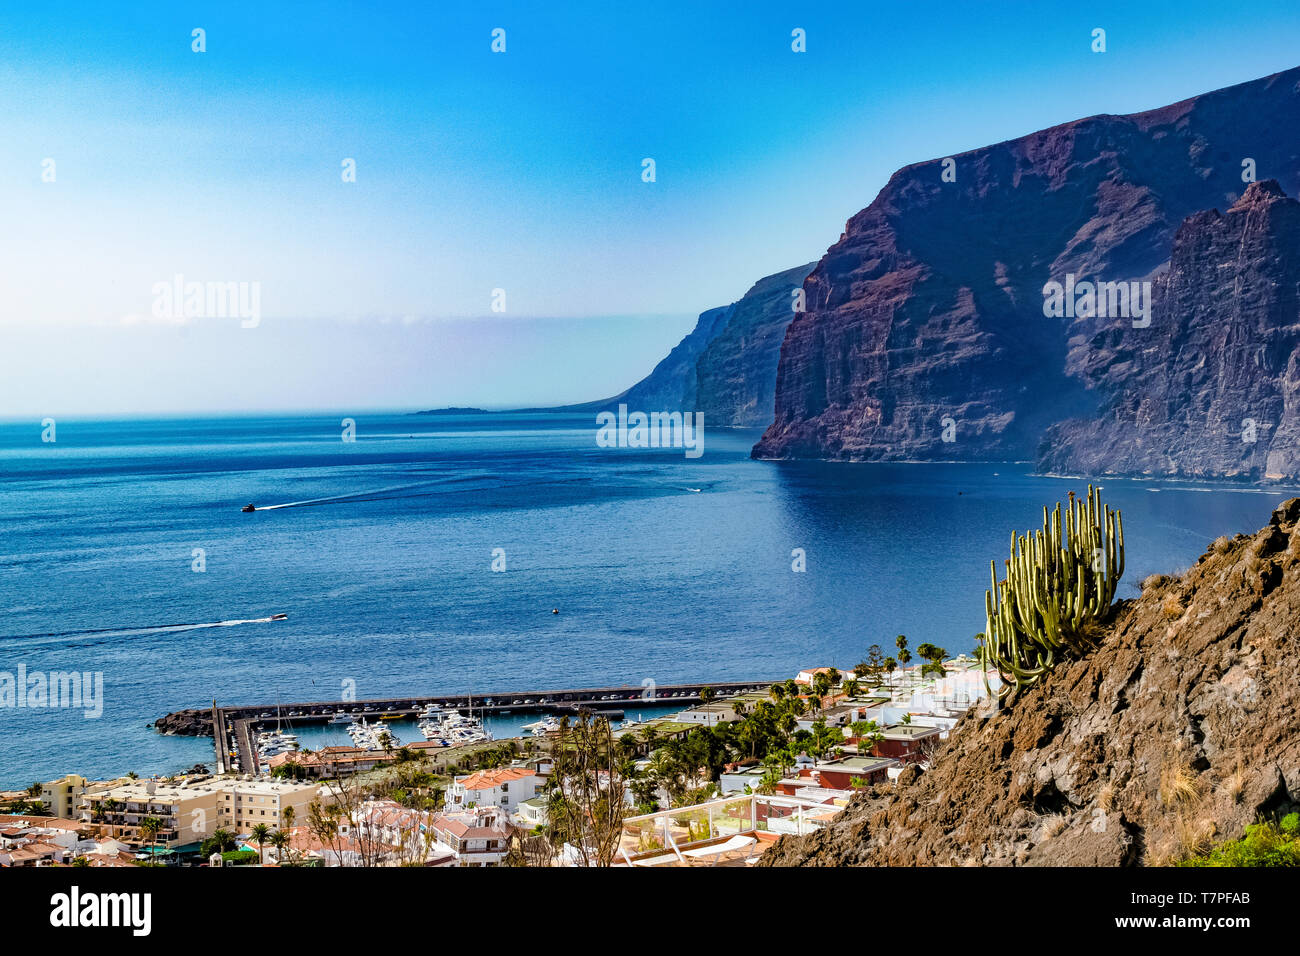 Los Gigantes and the harbour of Puerto de Santiago from a viewpoint. Those imposing rocks are thrown directly into the water. That's amazing. Stock Photo